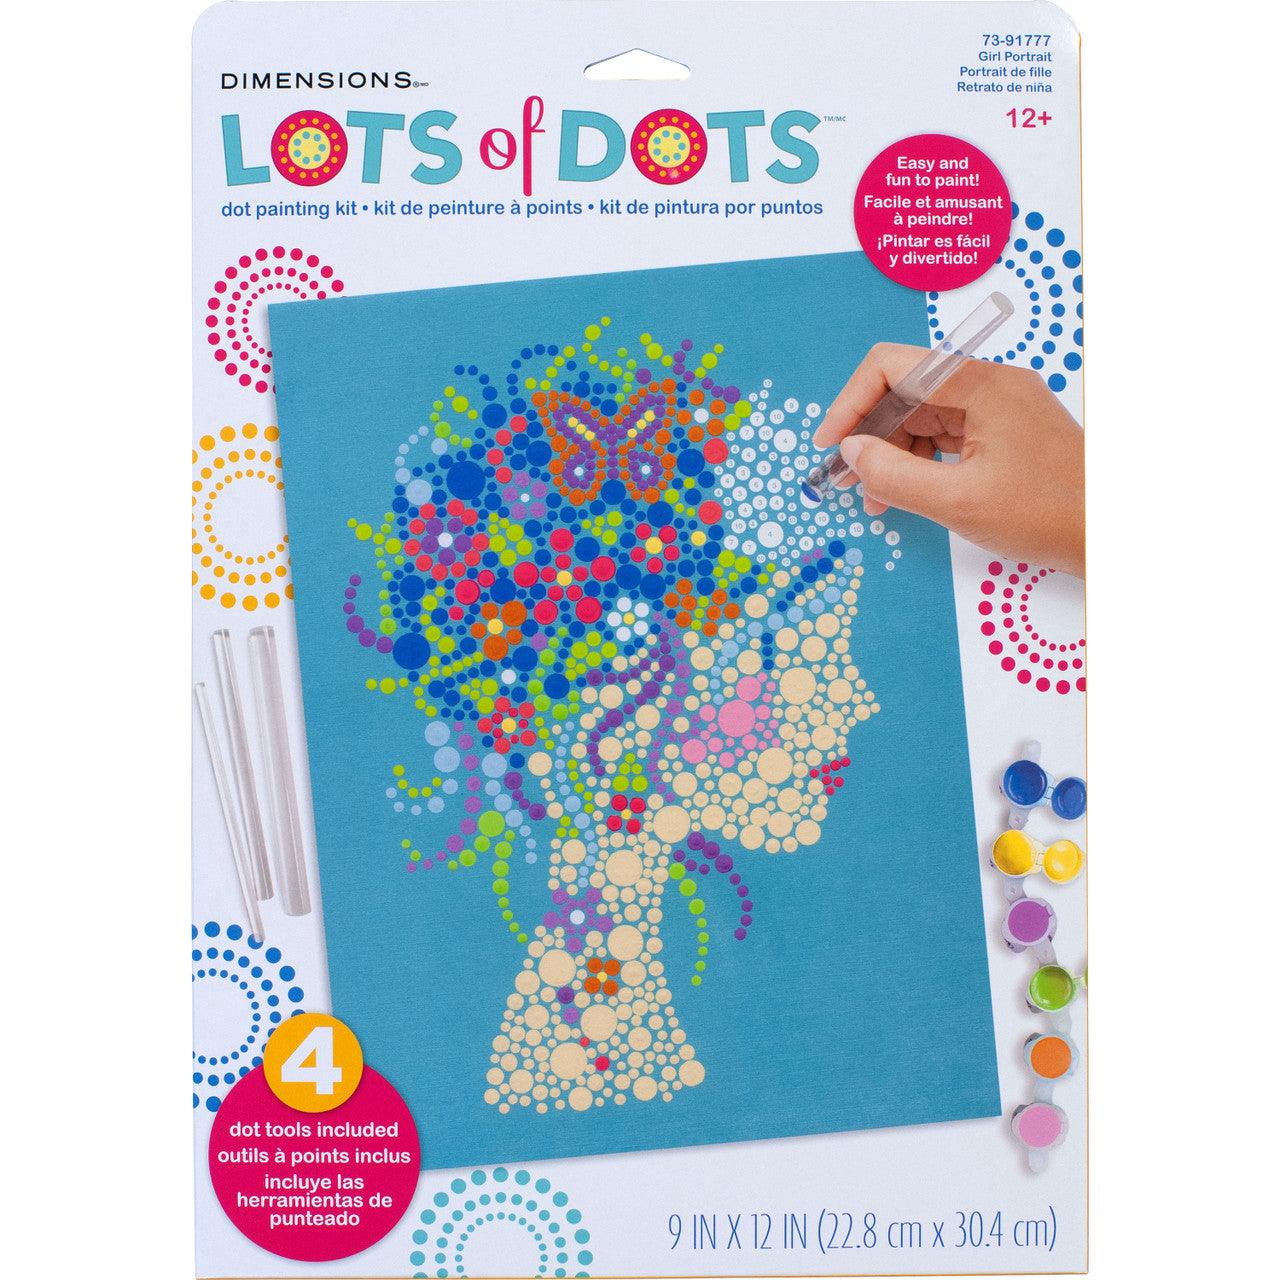 GIRL PORTRAIT DOTS 9x12, Paint by Number Kit, DIMENSIONS PAINTWORKS (73-91777) - Leo Hobby